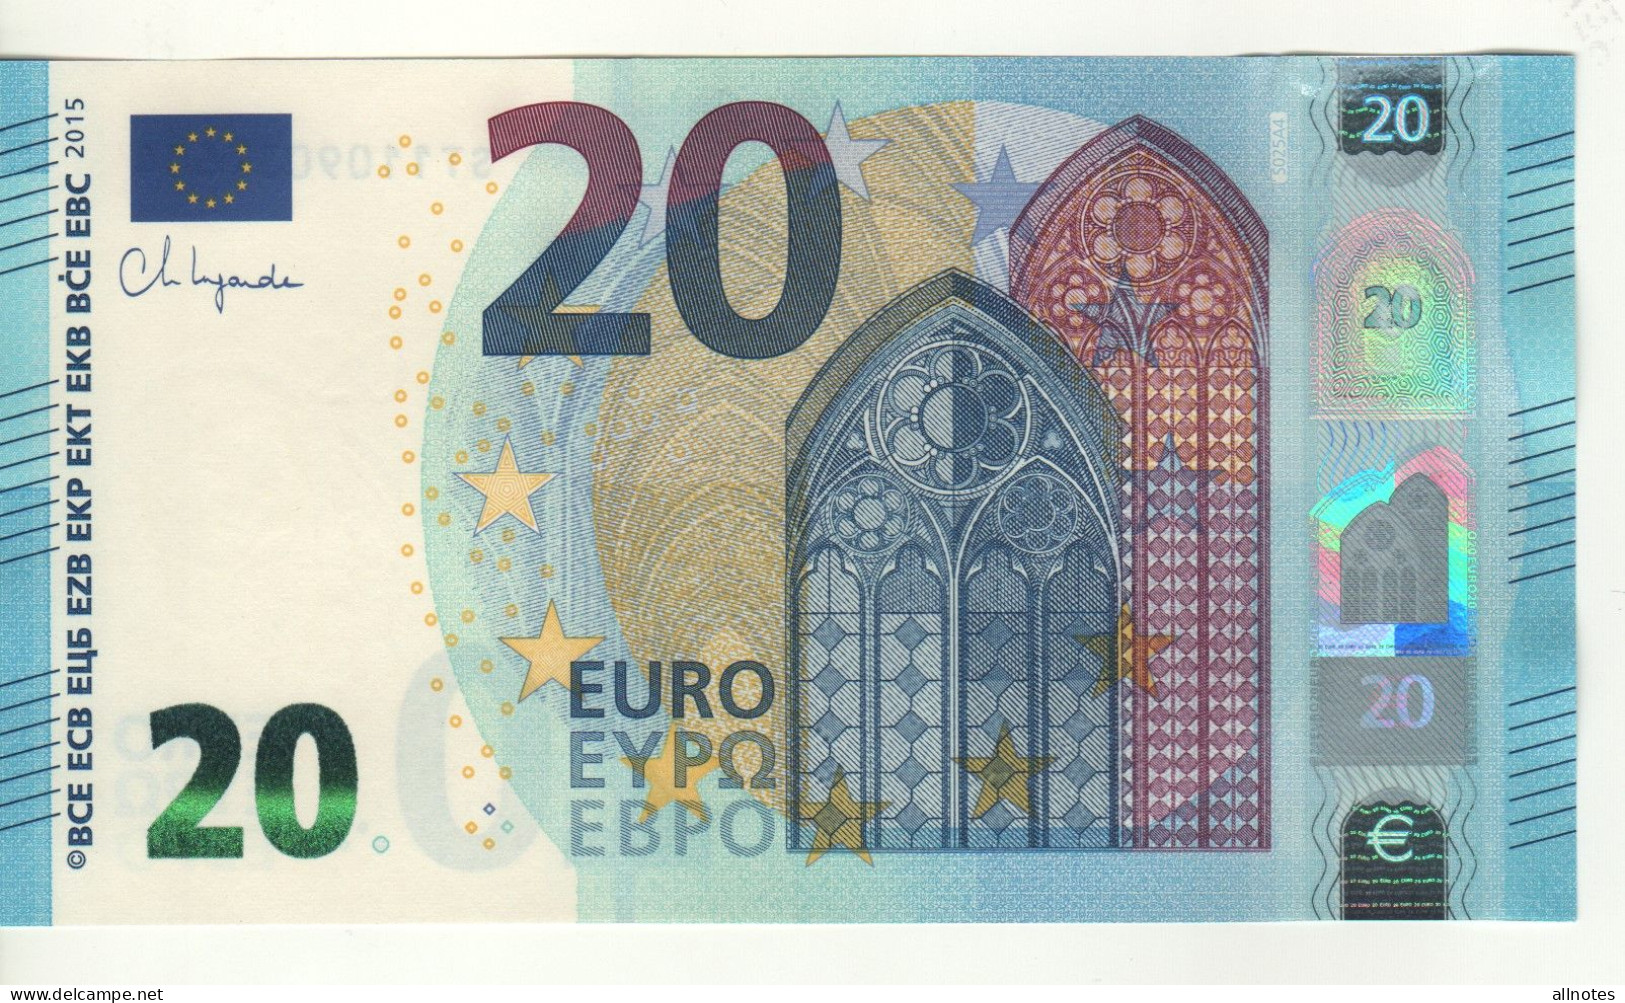 20 EURO  "Italy"  Ch. Lagarde     S 025 A4    ST1109037604  /  FDS - UNC - 20 Euro